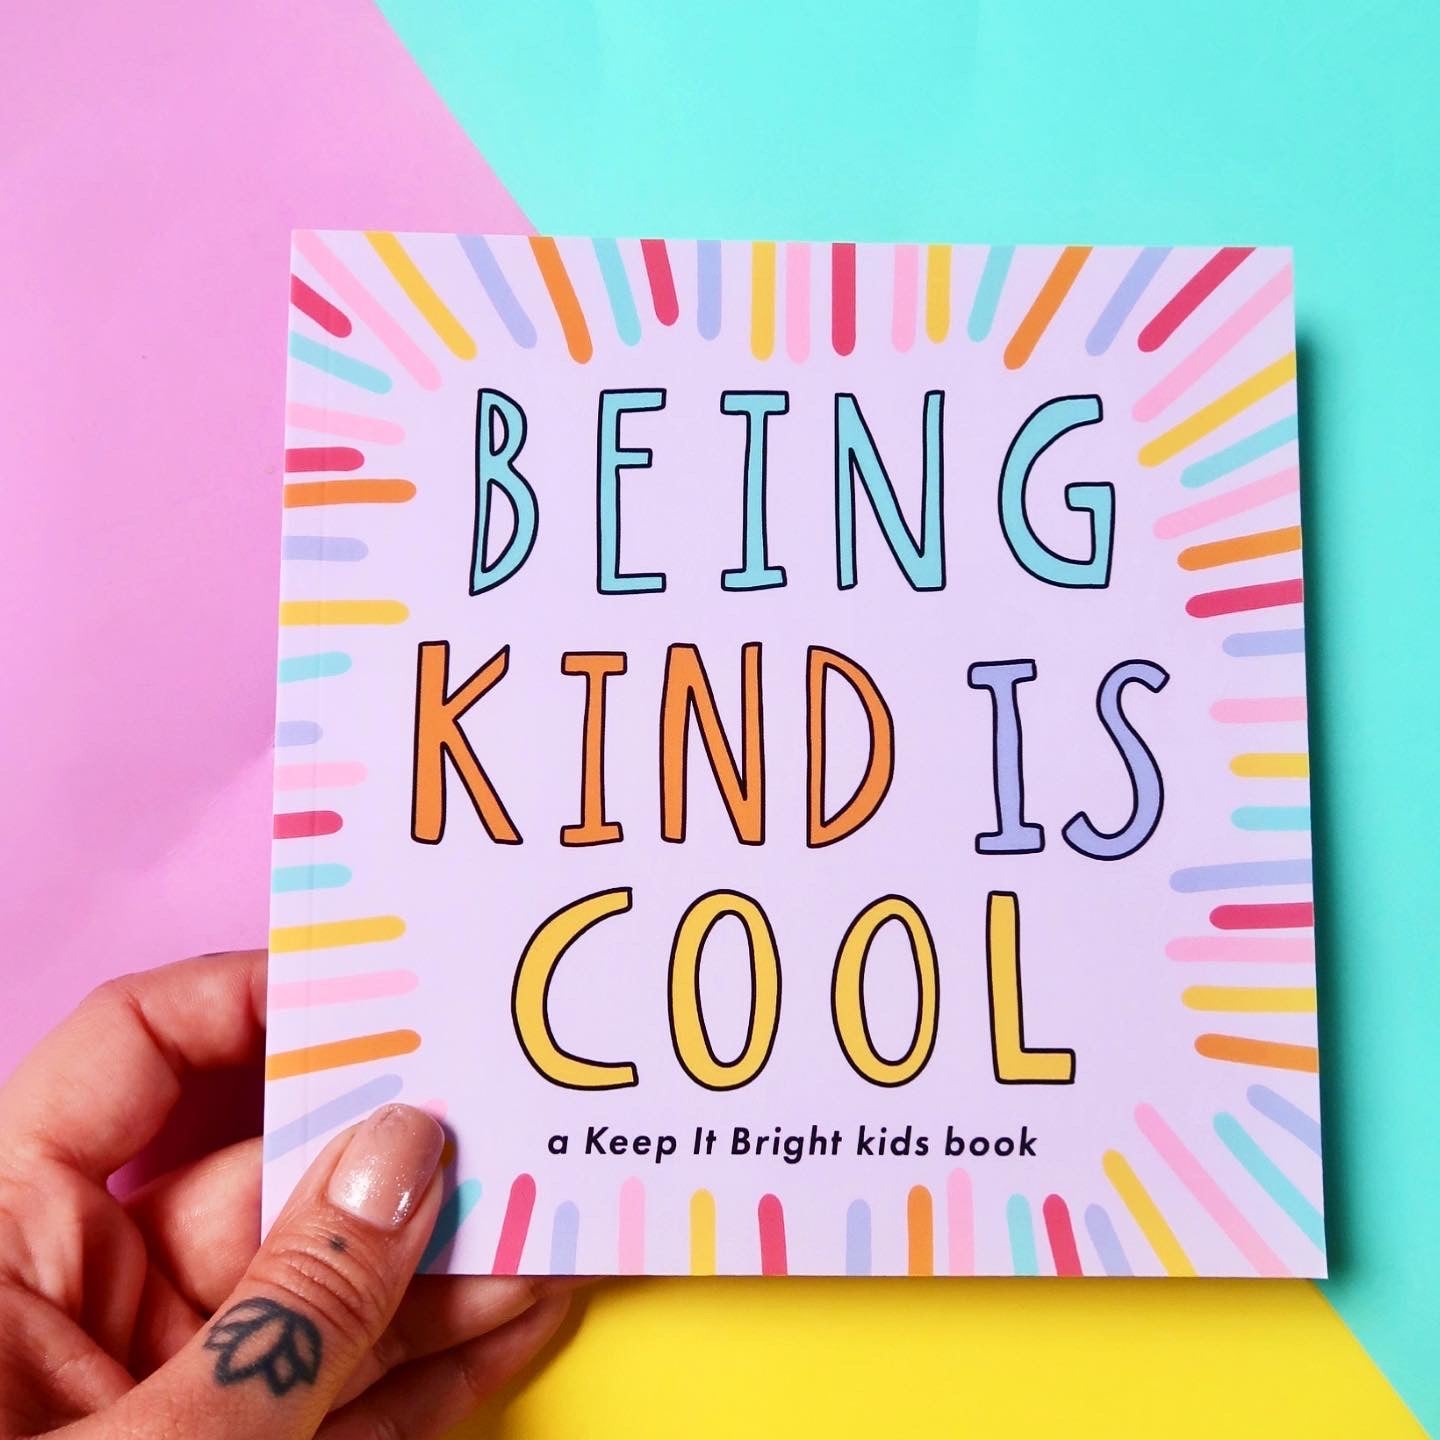 Being Kind Is Cool kids book - a book about kindness - front cover